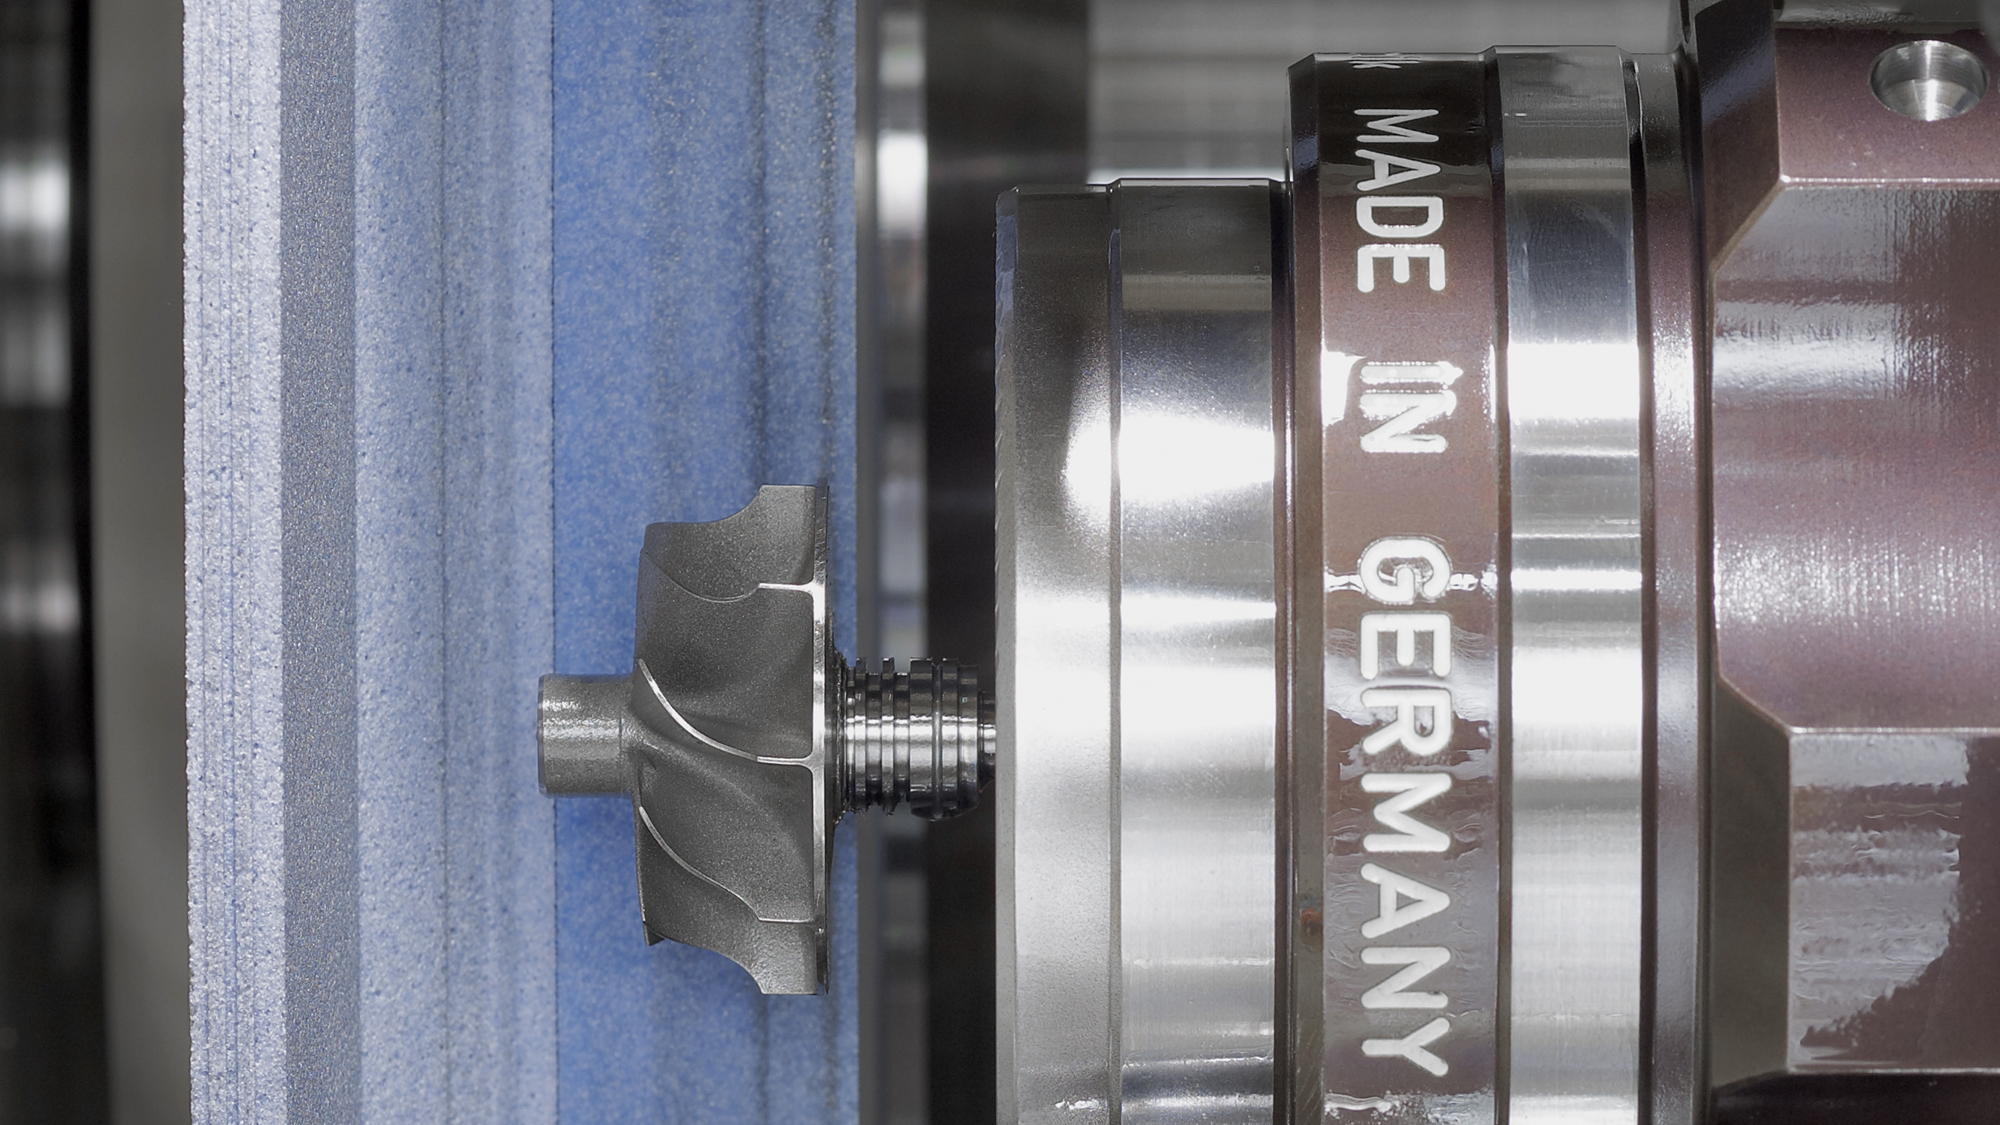 Distributors Of High-Precision Grinding Systems For Hydraulics For The Bearings Industry